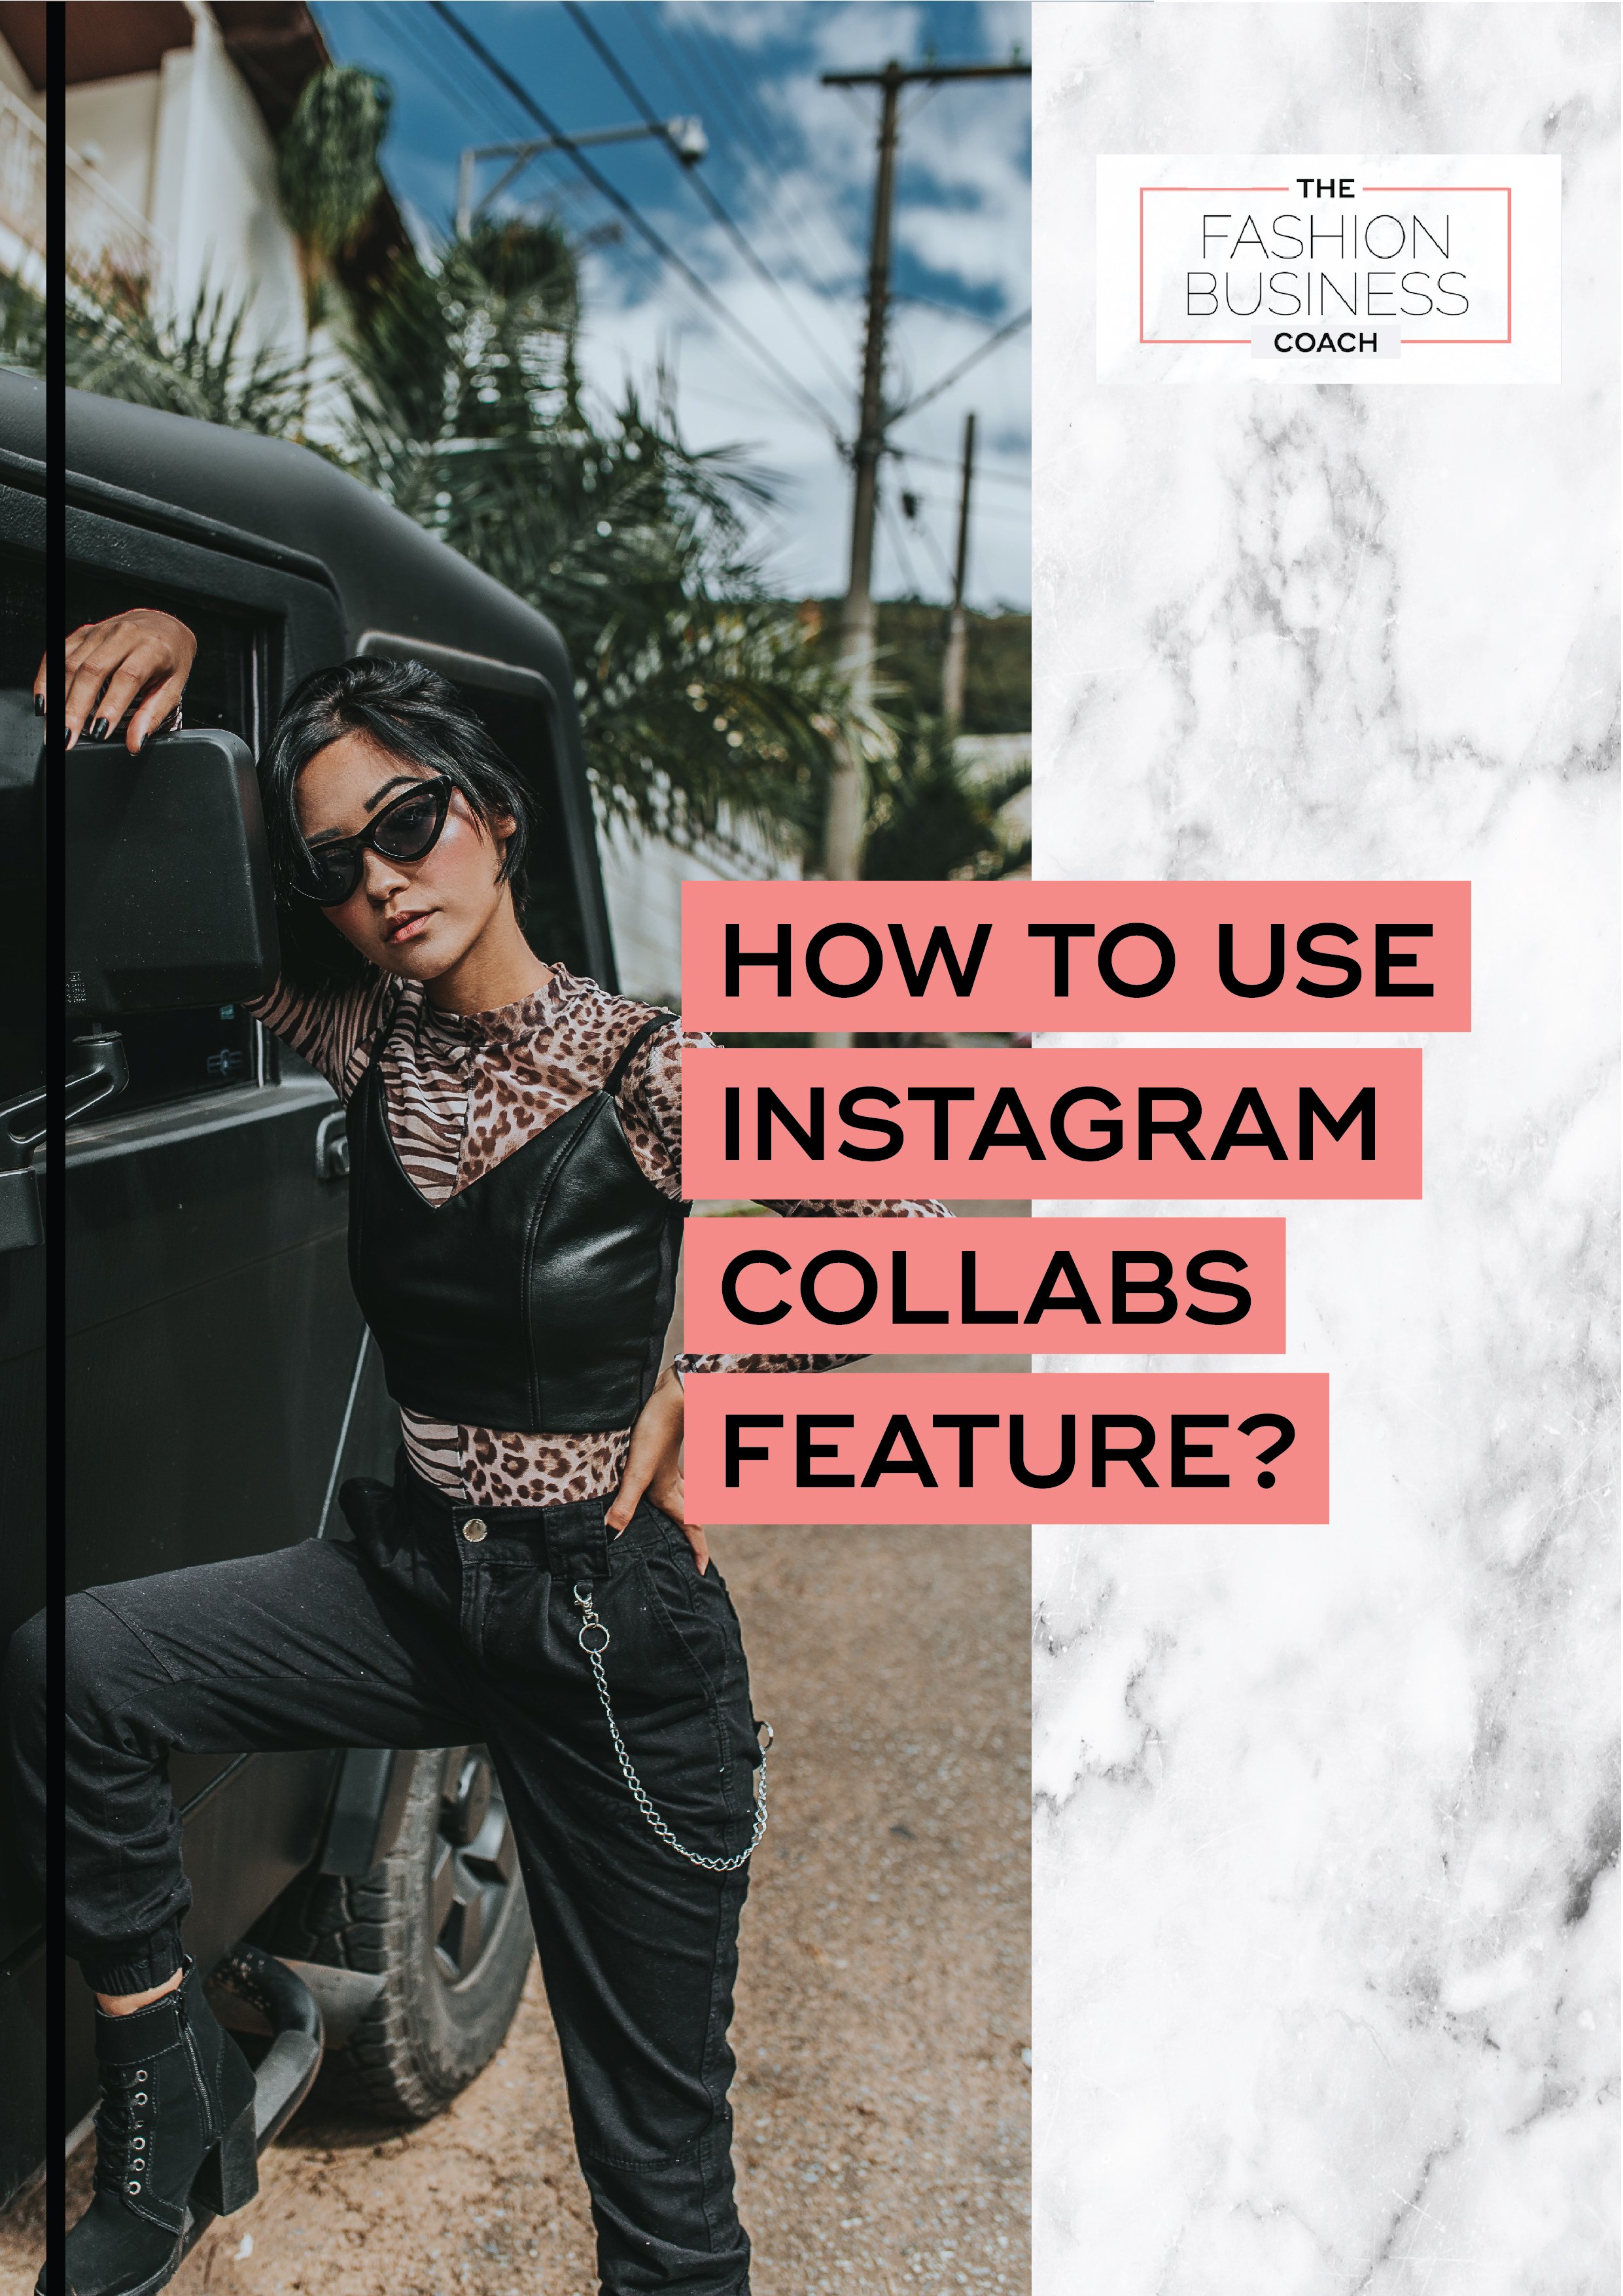 How to Use Instagram Collabs Feature 1.jpg